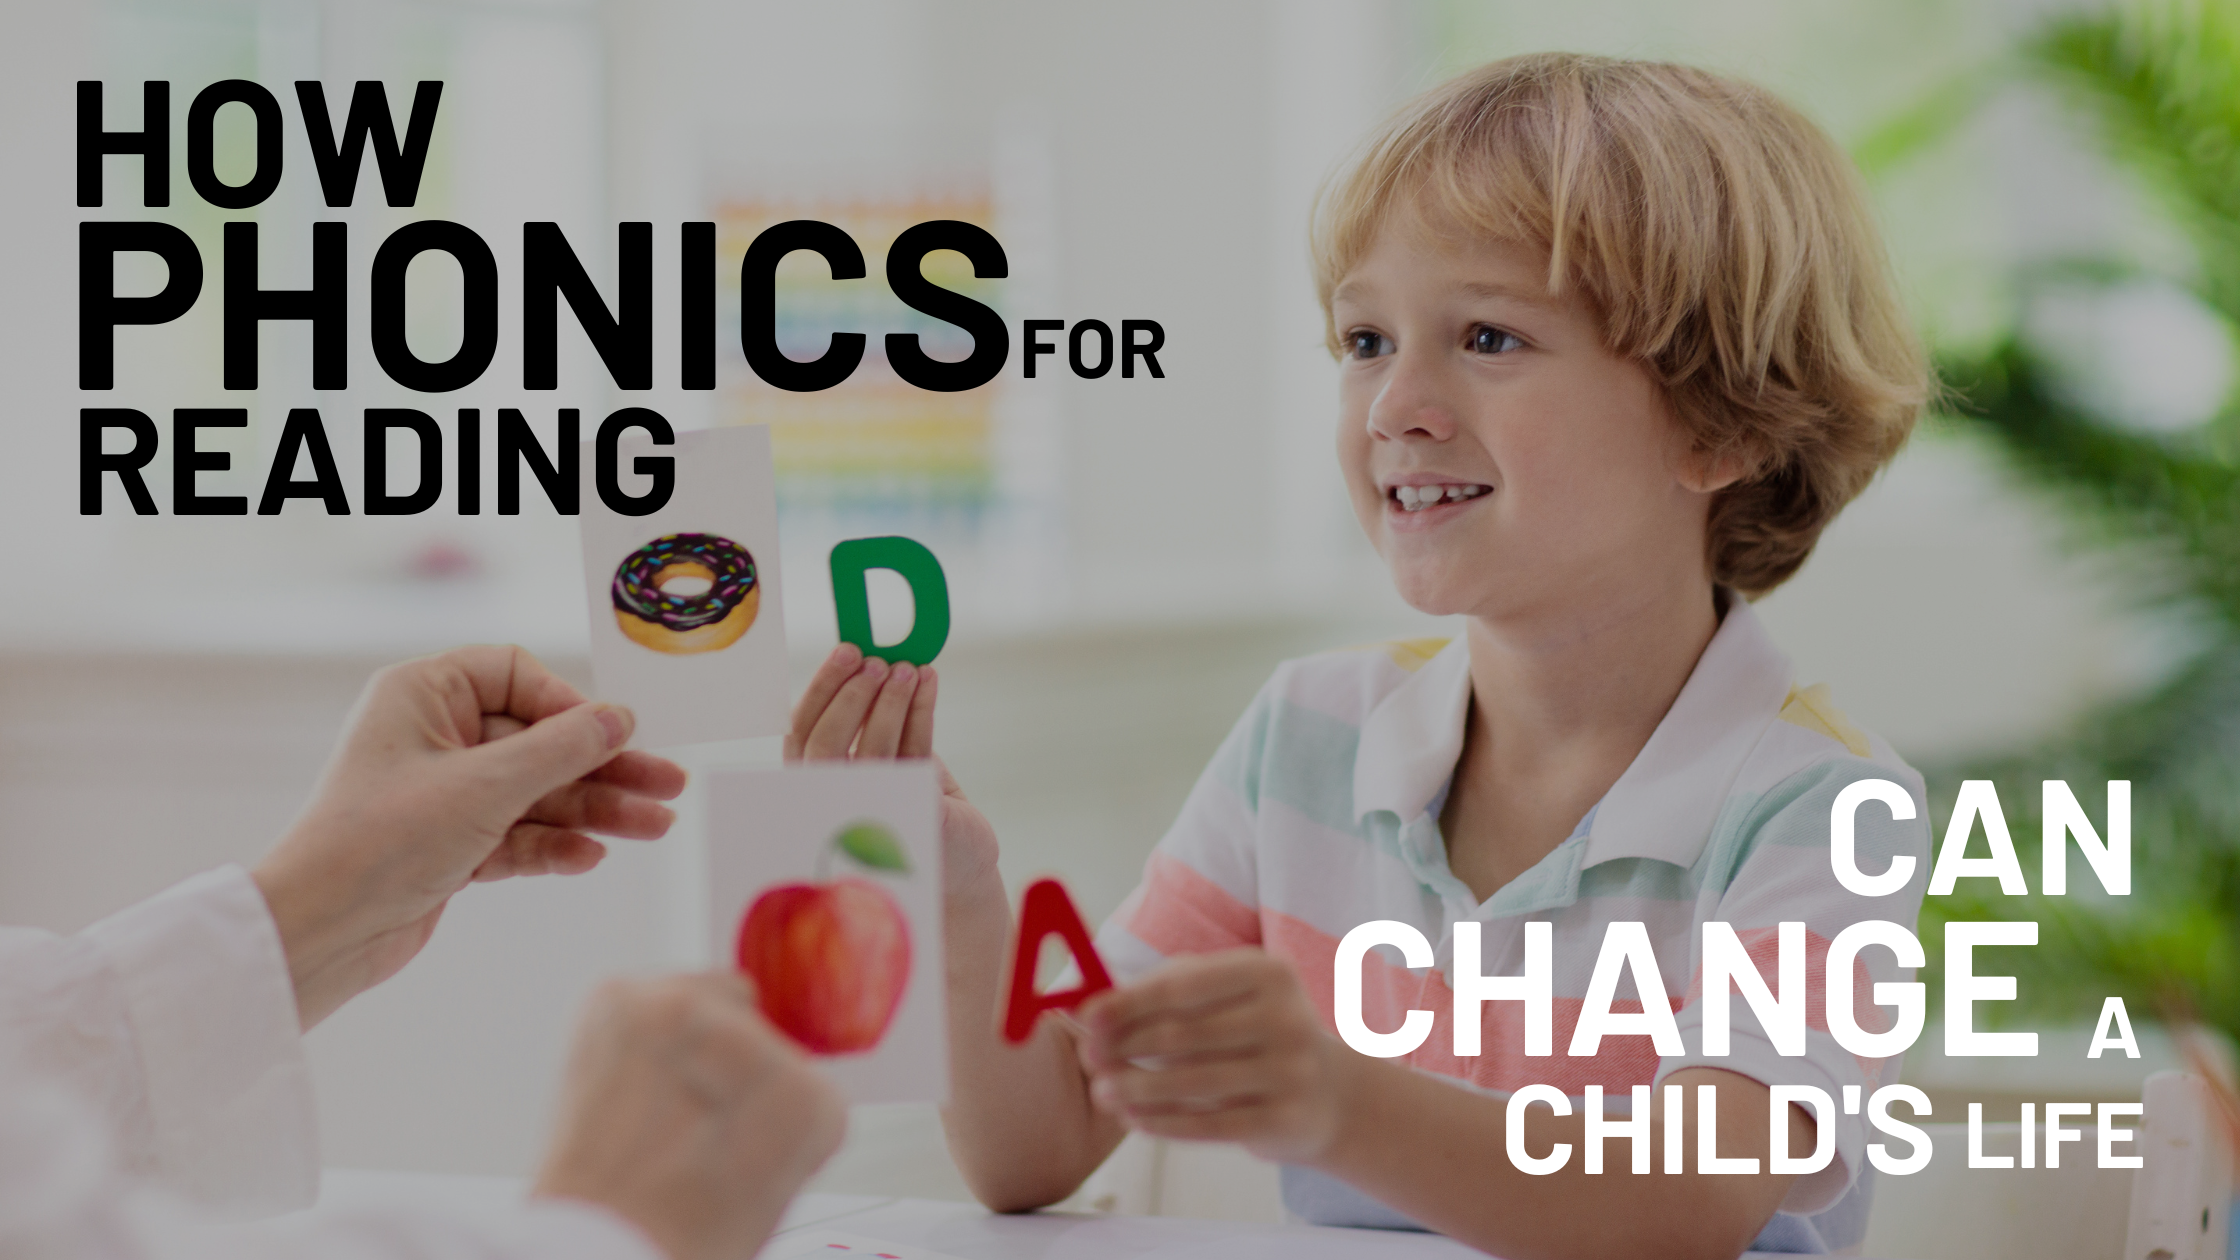 How can phonics for Reading change a child’s life? click now